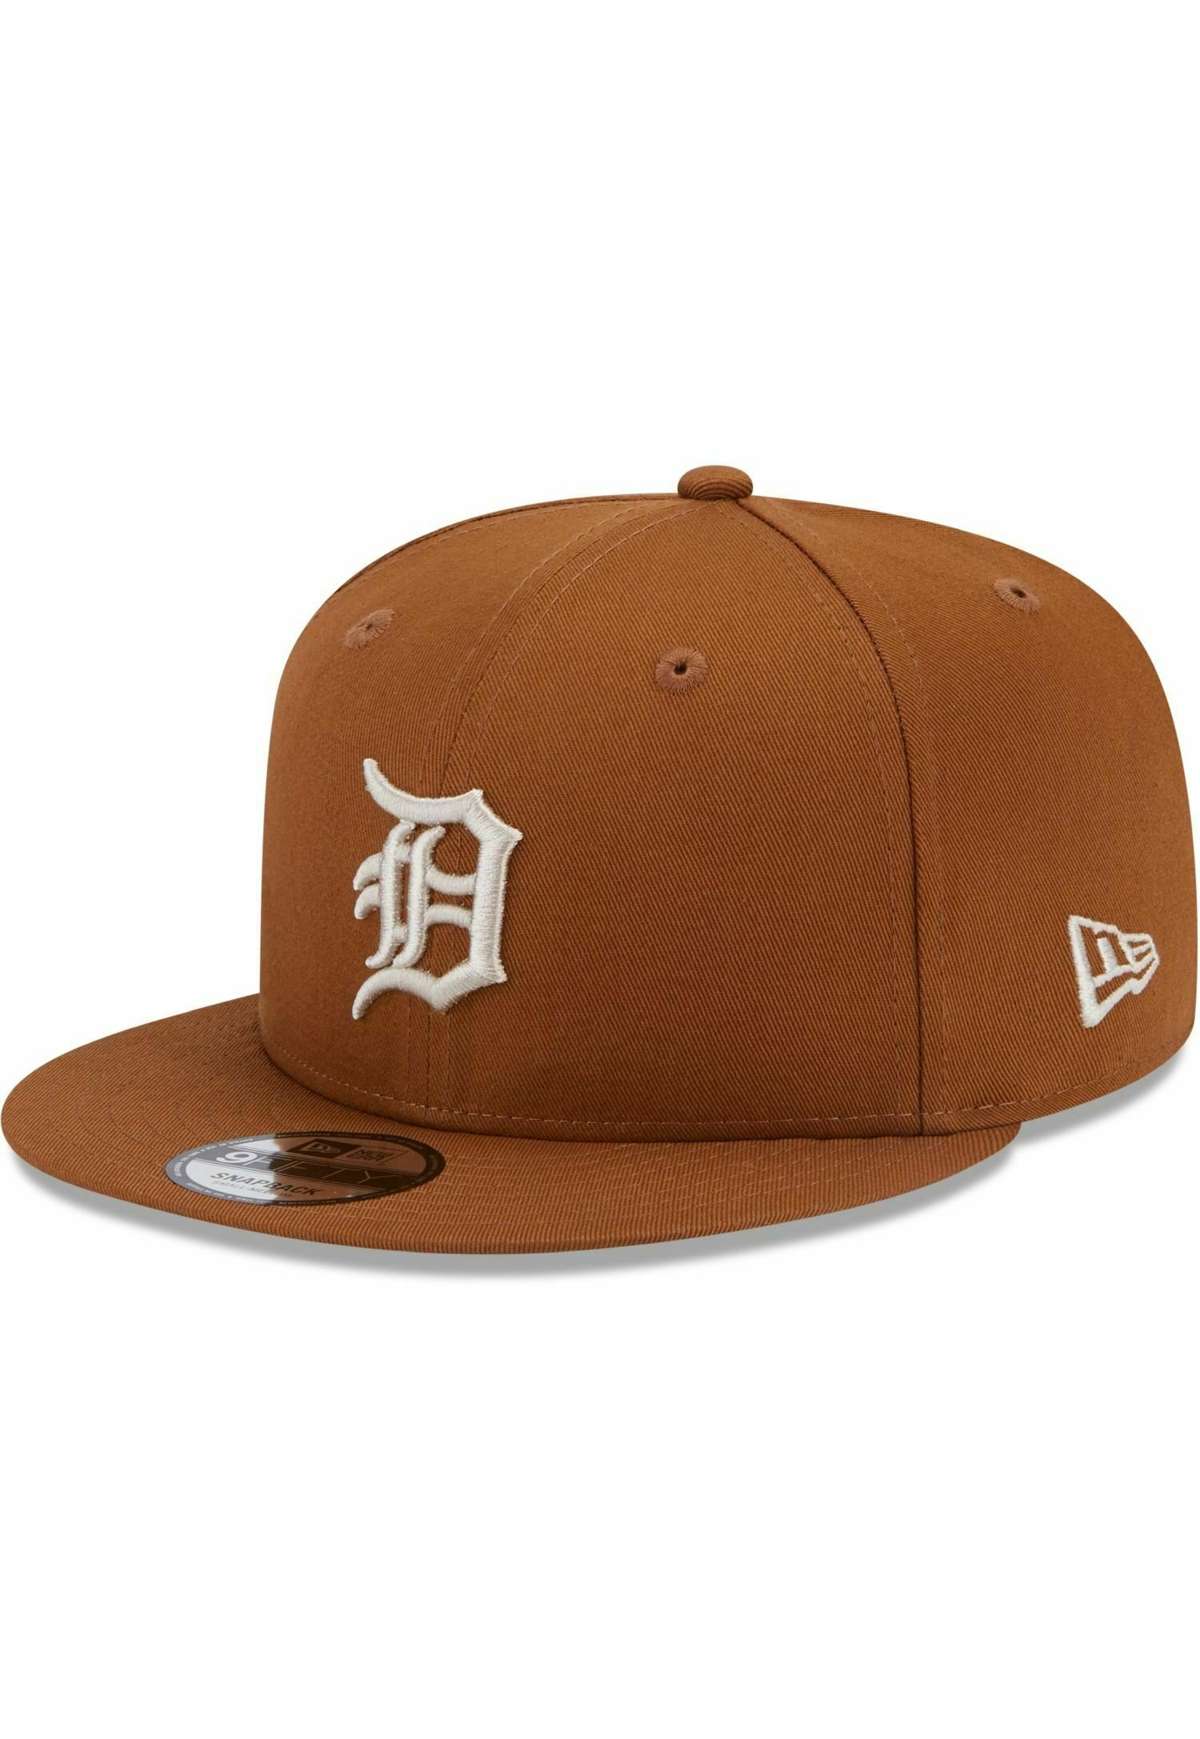 Кепка 9FIFTY SIDEPATCH DETROIT TIGERS